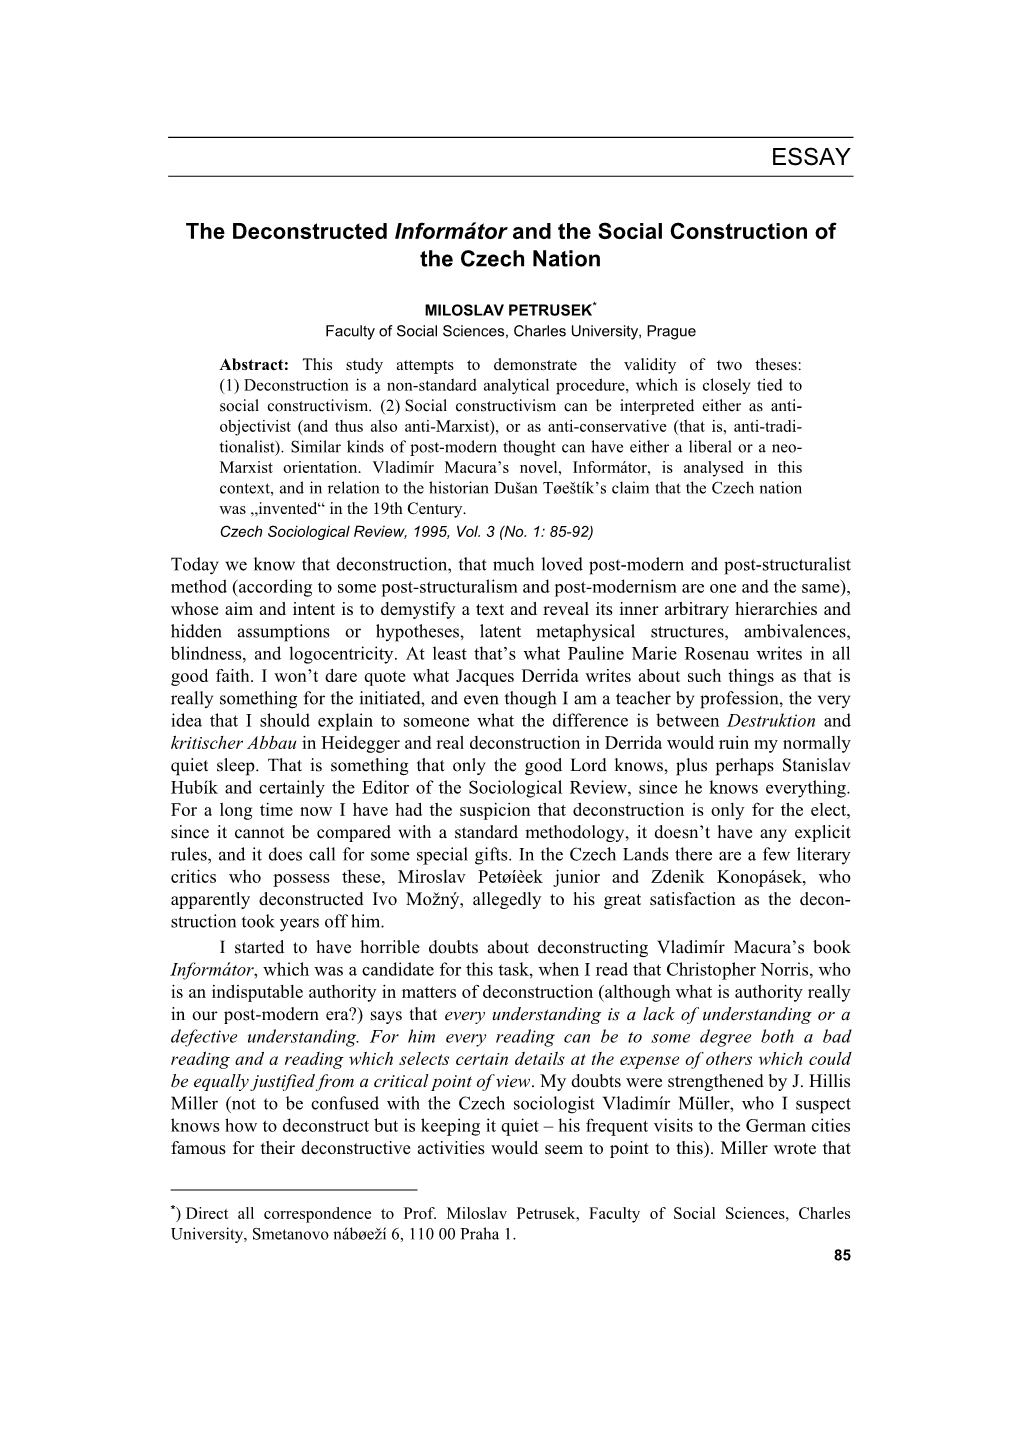 The Deconstructed "Informátor" and the Social Construction of The